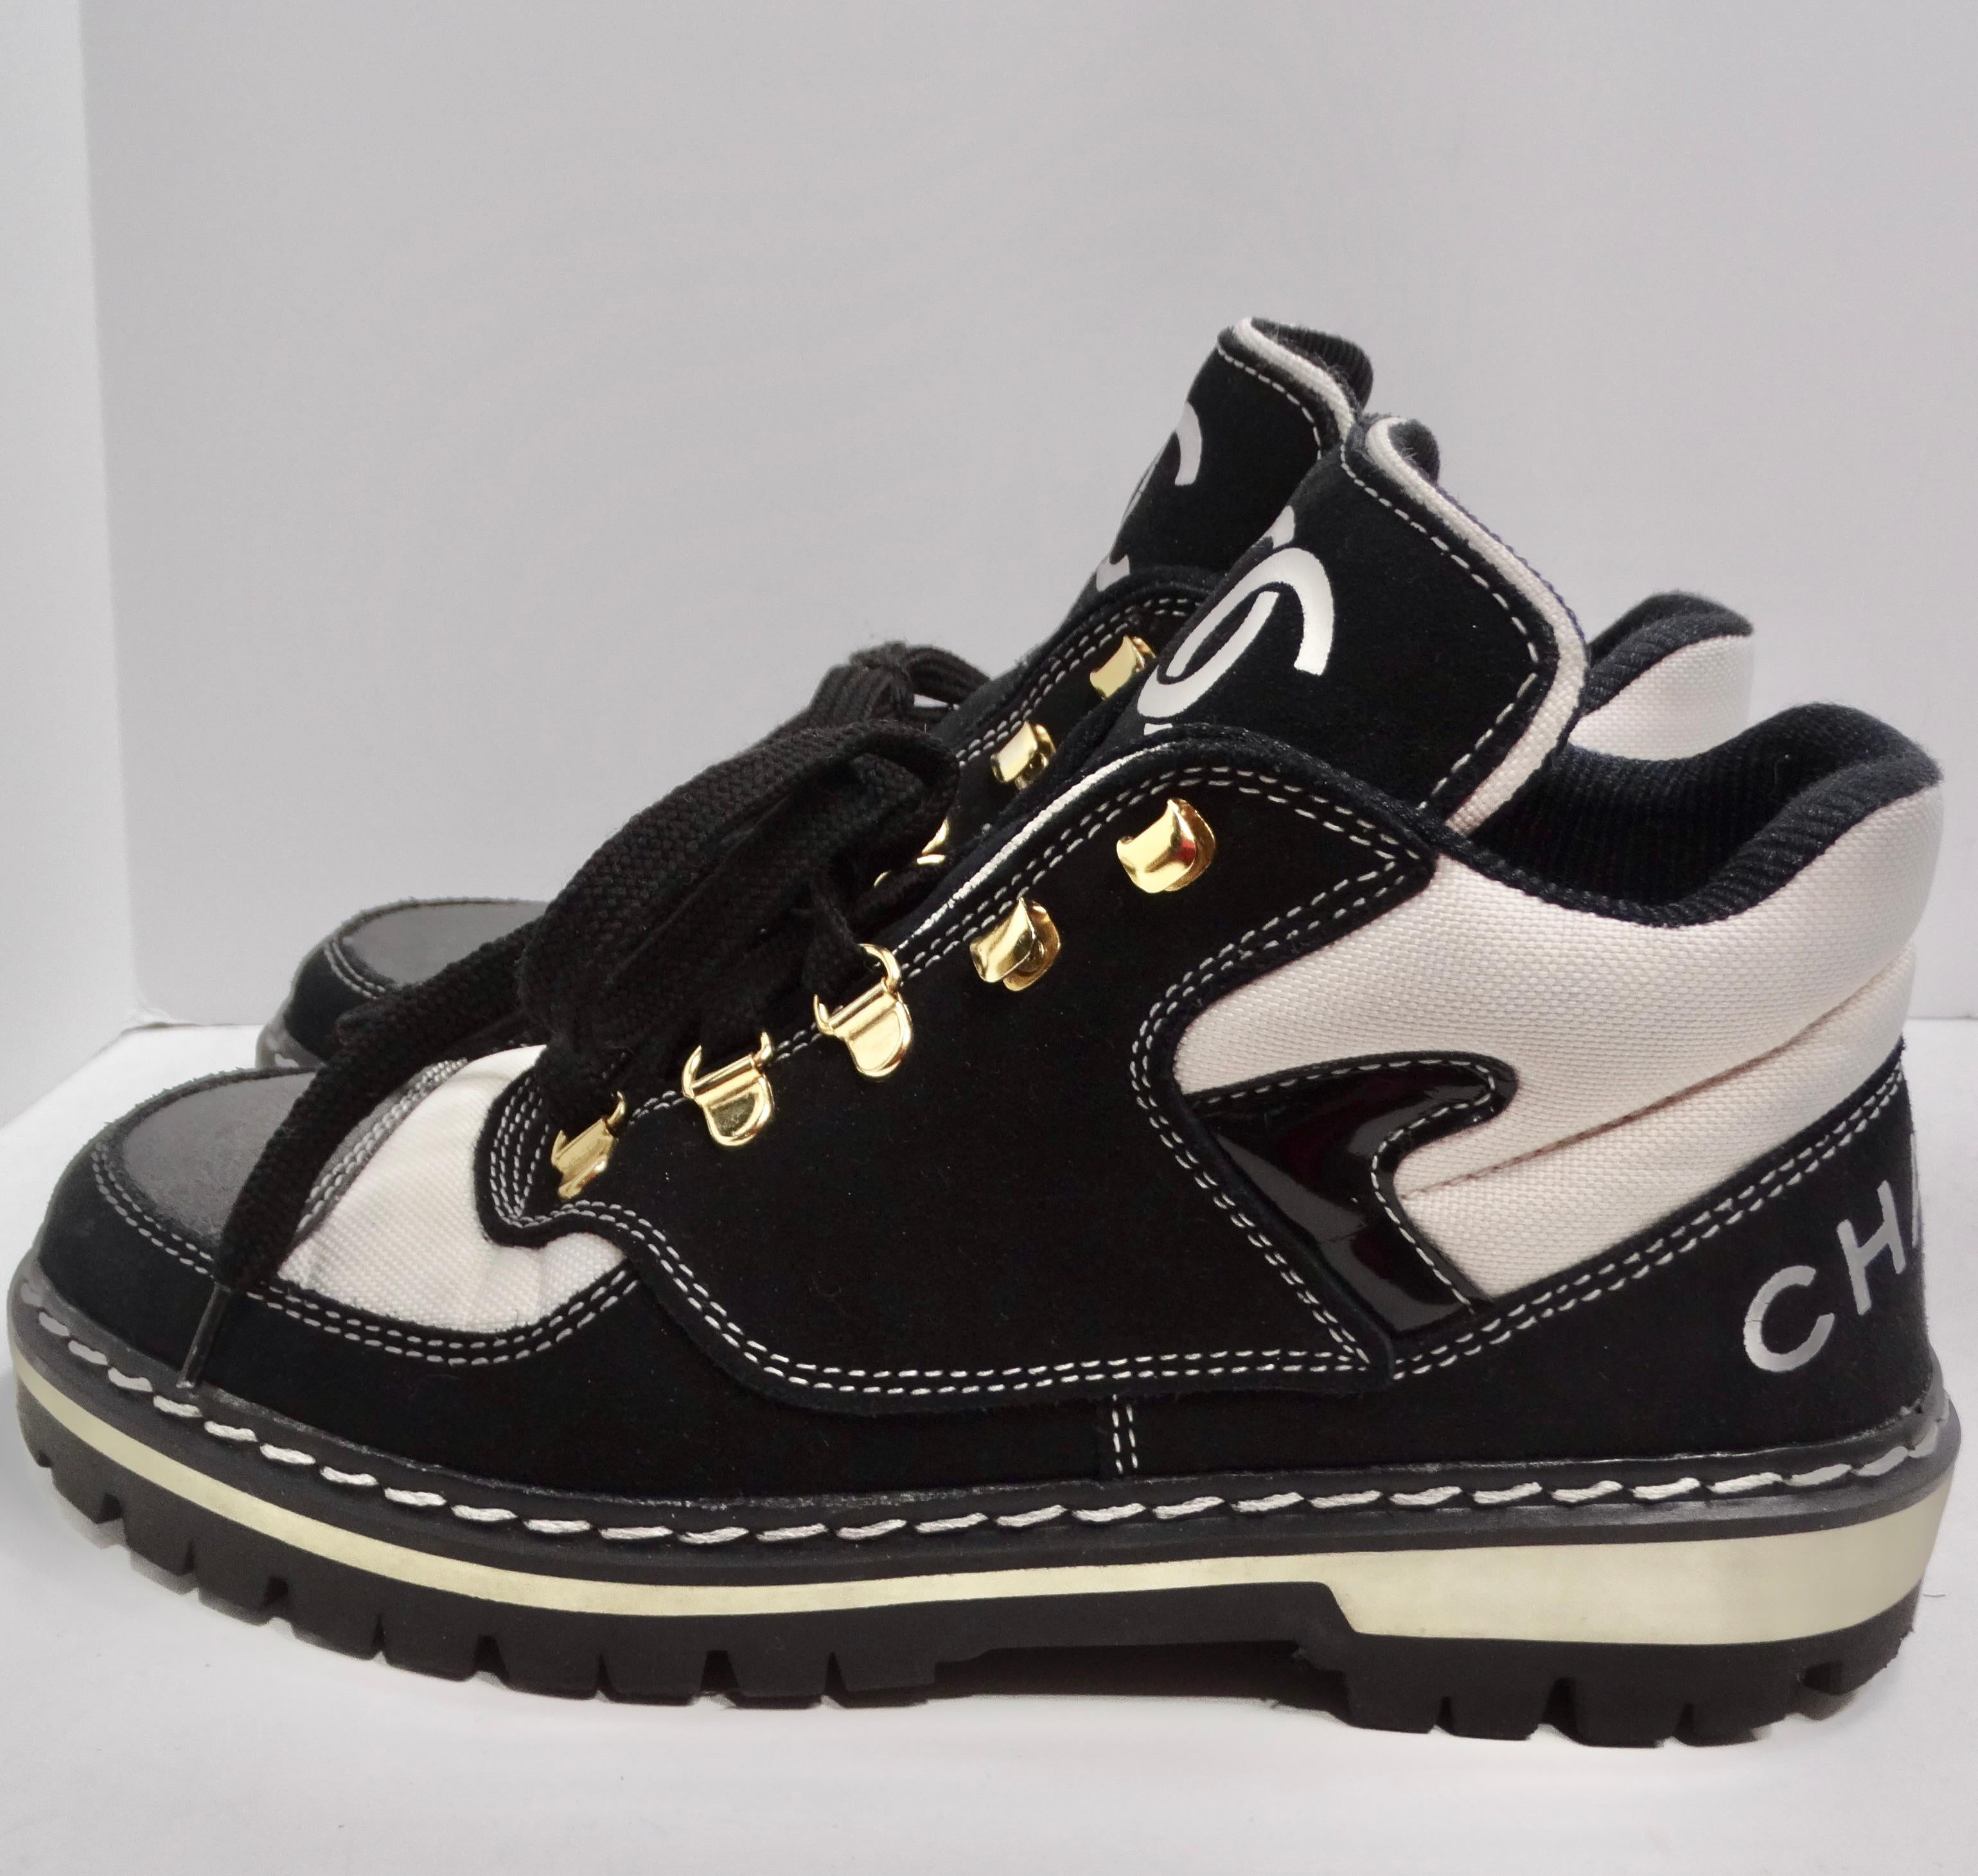 Do not miss out on the Chanel 1980s CC Lace-Up Black & White Sneakers—a remarkable pair that seamlessly blends the classic comfort of sneakers with an elevated Chanel twist. These sneakers aren't just footwear; they're a wearable expression of